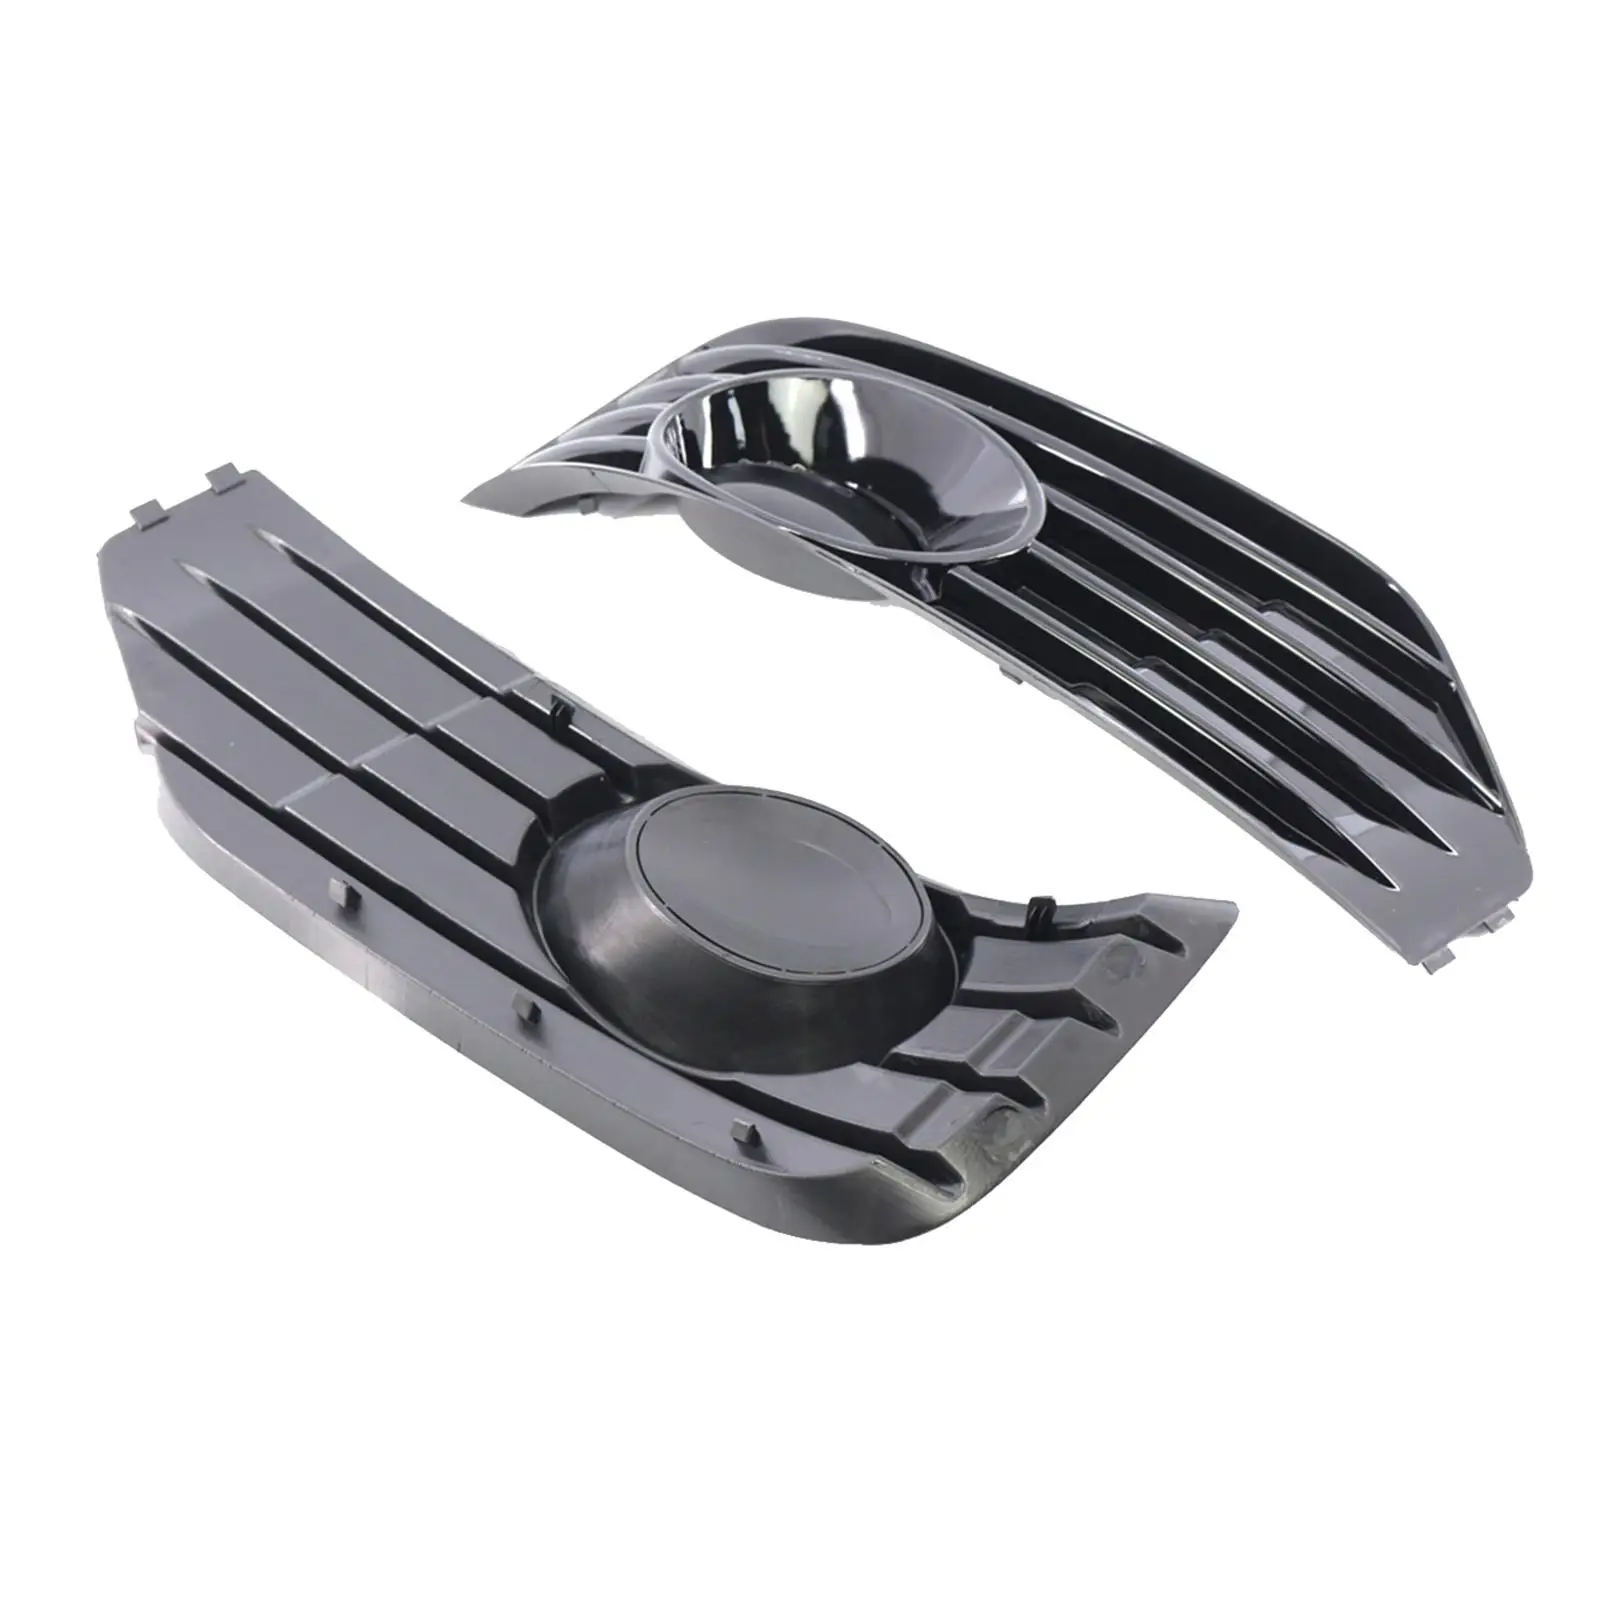 Fog Light Covers Easy to Install Exterior Trims Direct Replaces Mounting Hardware Auto Accessory for VW T5.1 Sportline